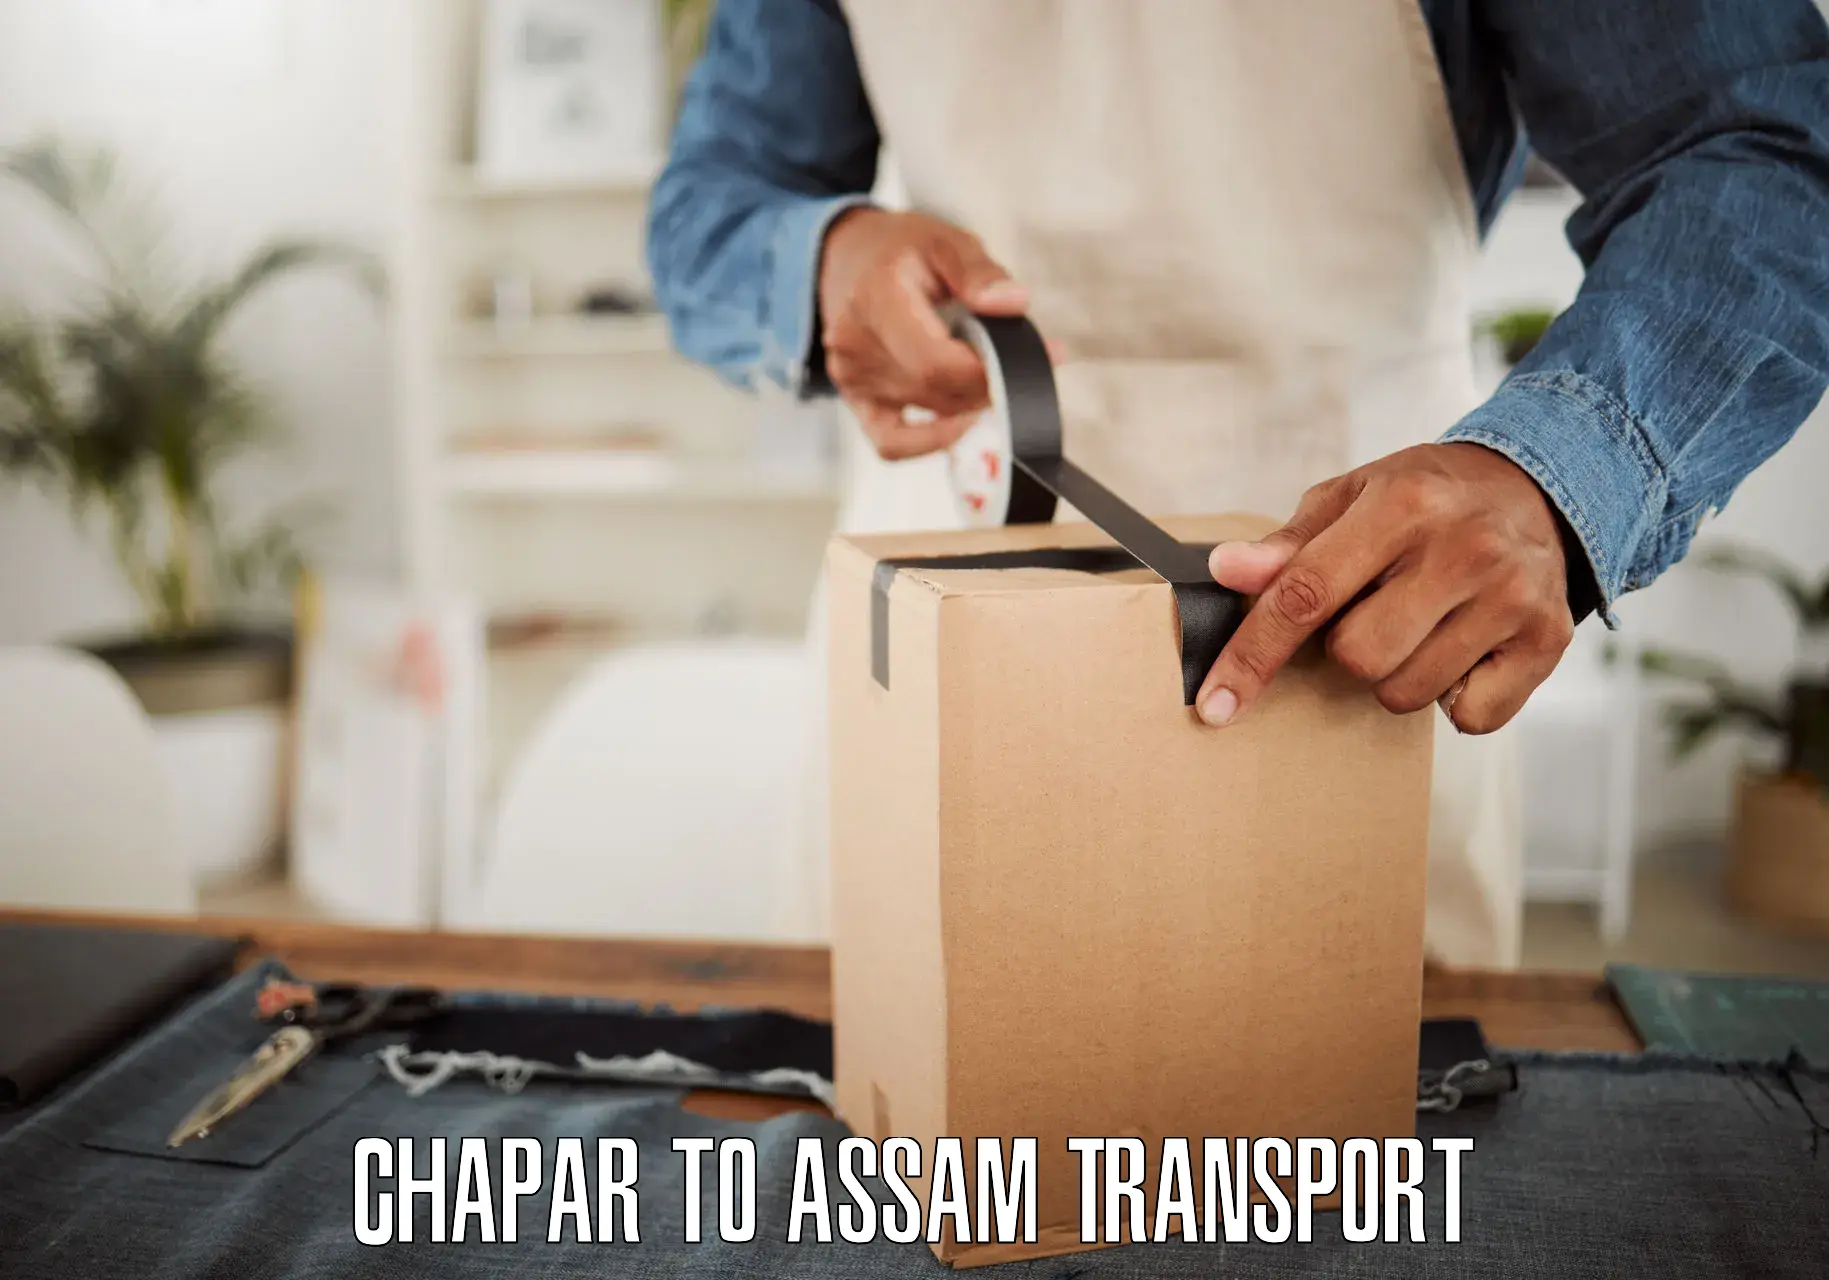 Commercial transport service Chapar to IIIT Guwahati